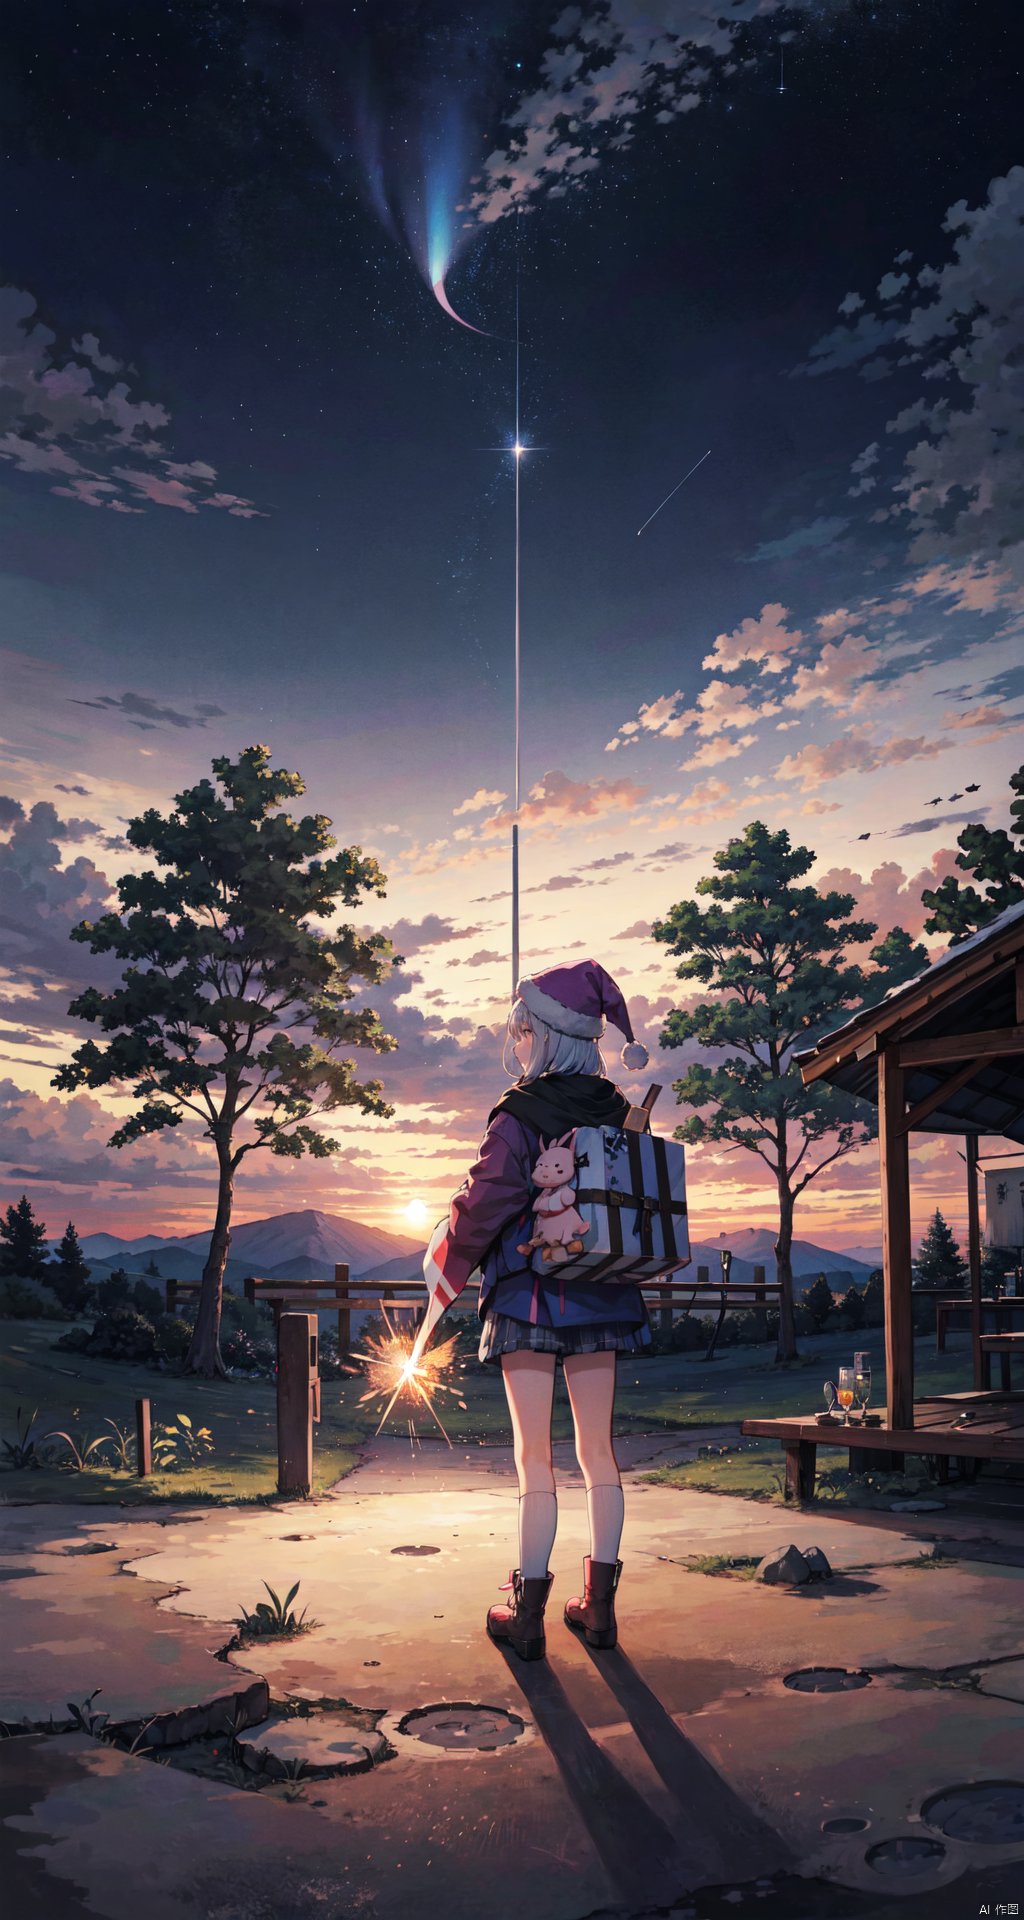  1970s_\(style\), 1980s_\(style\), 1girl, above_clouds, aerial_fireworks, alien, america, american_flag, angela_balzac, antlers, astronaut, aurora, baggy_clothes, balcony, beamed_eighth_notes, blue_sky, boots, building, campfire, castle, chimney, christmas, christmas_lights, christmas_ornaments, christmas_tree, city, city_lights, cityscape, cloud, cloudy_sky, condensation_trail, constellation, constellation_print, crescent_moon, desert, dusk, dust, earth_\(planet\), embers, ferris_wheel, festival, field, fireflies, fireworks, flag_background, flashlight, flower_field, fountain, full_moon, galaxy, globe, gradient_sky, grass, halftone, halftone_background, hill, hirschgeweih_antennas, horizon, house, jacket, lamppost, landscape, light, light_particles, lighthouse, lights, looking_outside, milky_way, miyamizu_mitsuha, moon, moonlight, mountain, mountainous_horizon, night, night_sky, onsen, outdoors, pillar, pine_tree, pink_skirt, planet, print_headwear, purple_sky, pussy_juice_puddle, rainbow, reindeer, rocket, rooftop, science_fiction, shooting_star, shore, skirt, sky, skyline, skyscraper, snow, snowing, solo, space, space_craft, space_helmet, spacesuit, sparkler, standing, star_\(sky\), star_\(symbol\), starry_background, starry_sky, starry_sky_print, steam, summer_festival, sunrise, sunset, tanabata, tanzaku, telescope, tent, touwa_erio, tower, town, tree, twilight, uchiwa, ufo, ultimate_madoka, utility_pole, vines, window, winter, wooden_fence, yellow_shorts, yukata